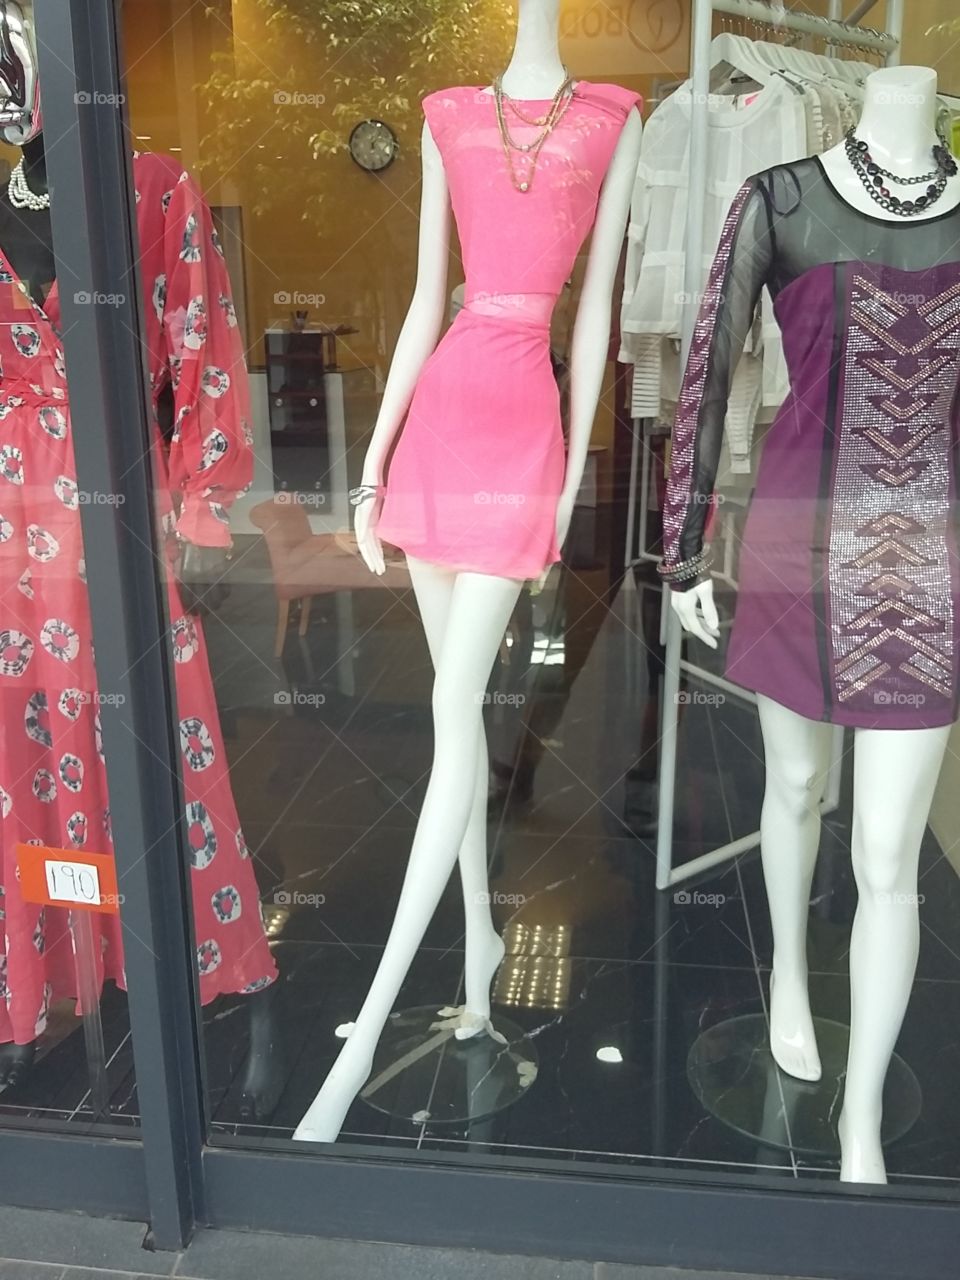 Extremely thin mannequin